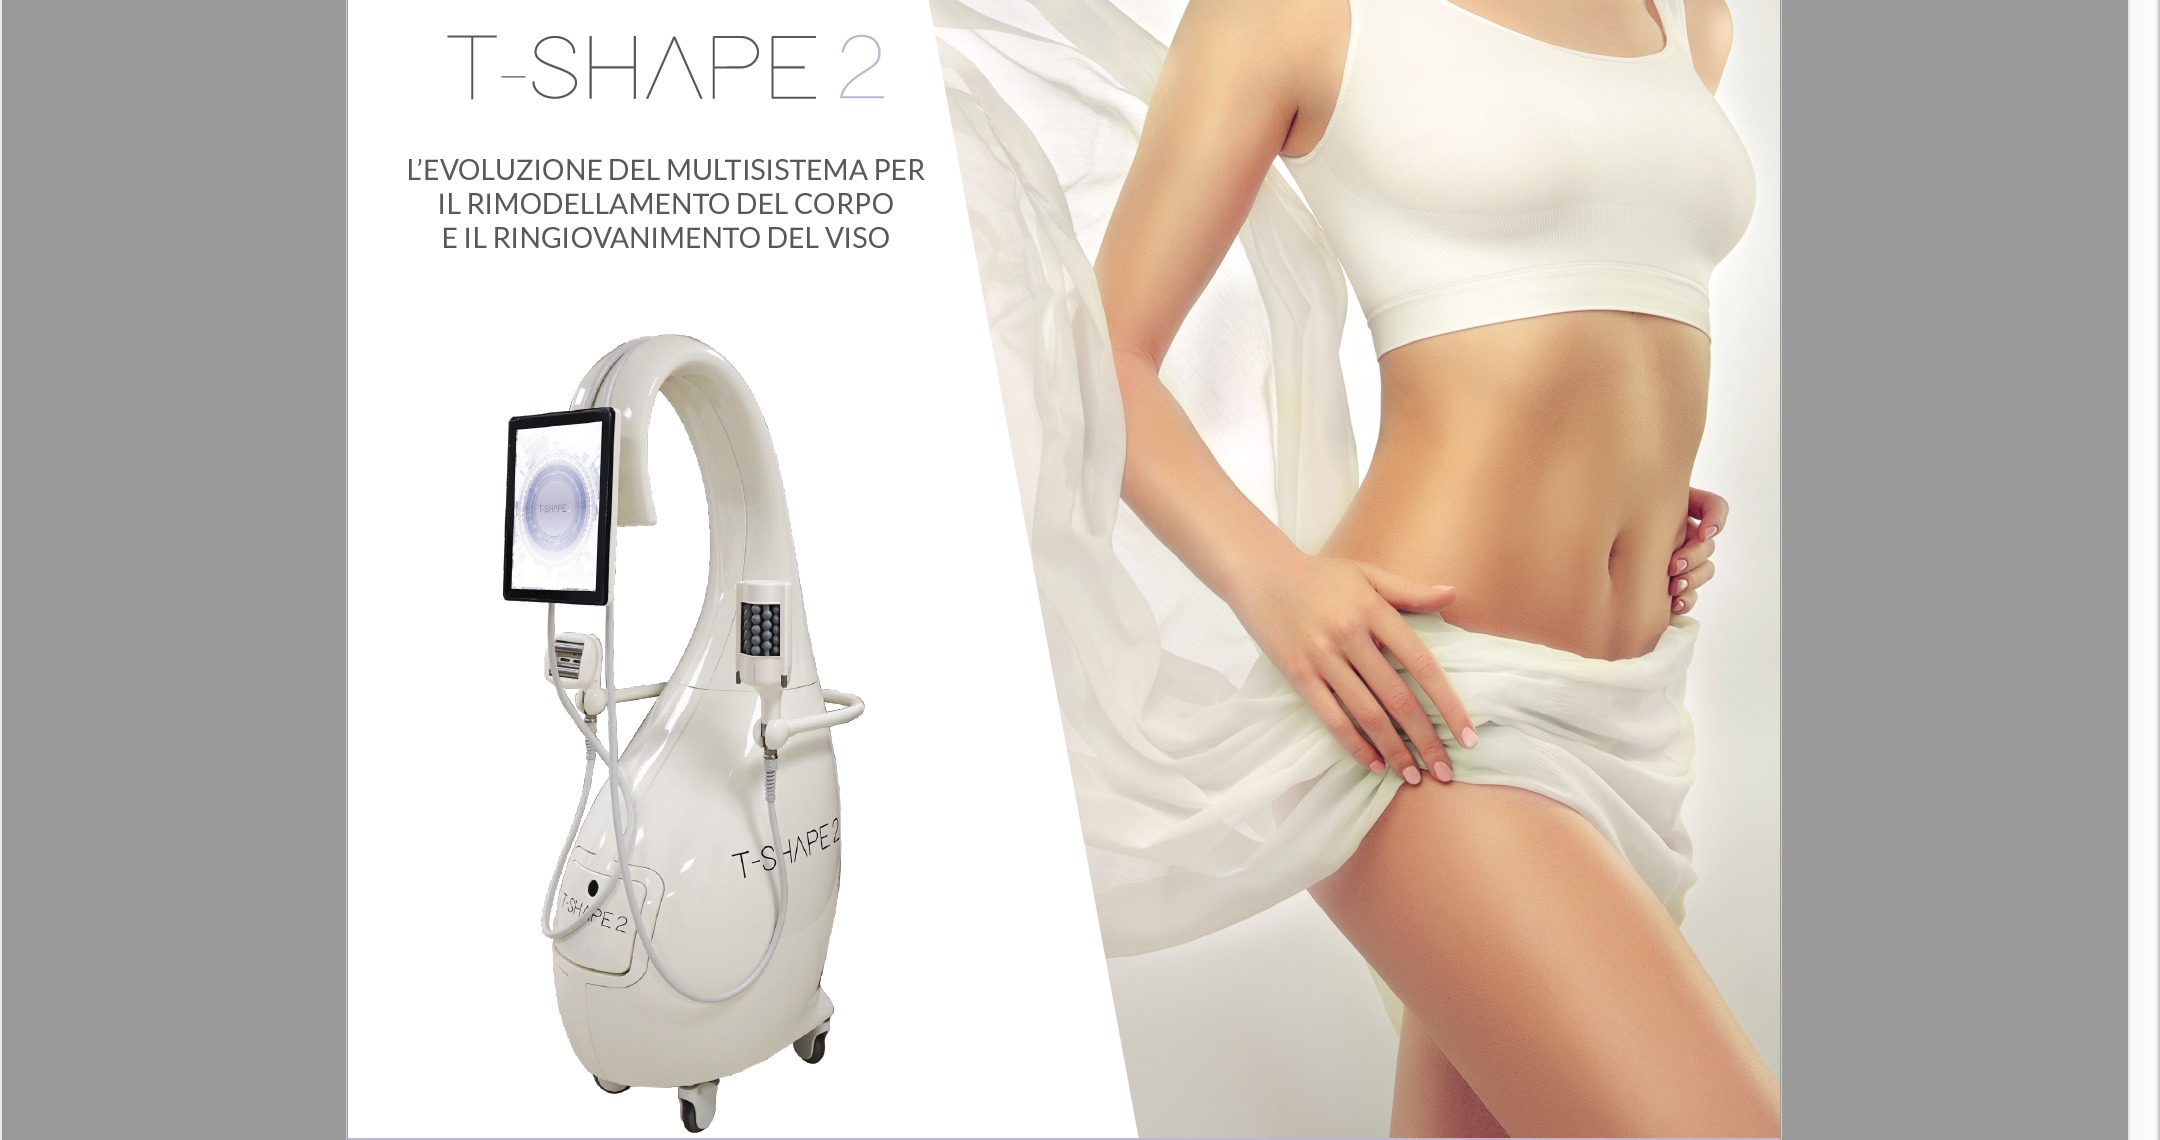 Reshape your body - now it's possible! - CARACALLA beauty center